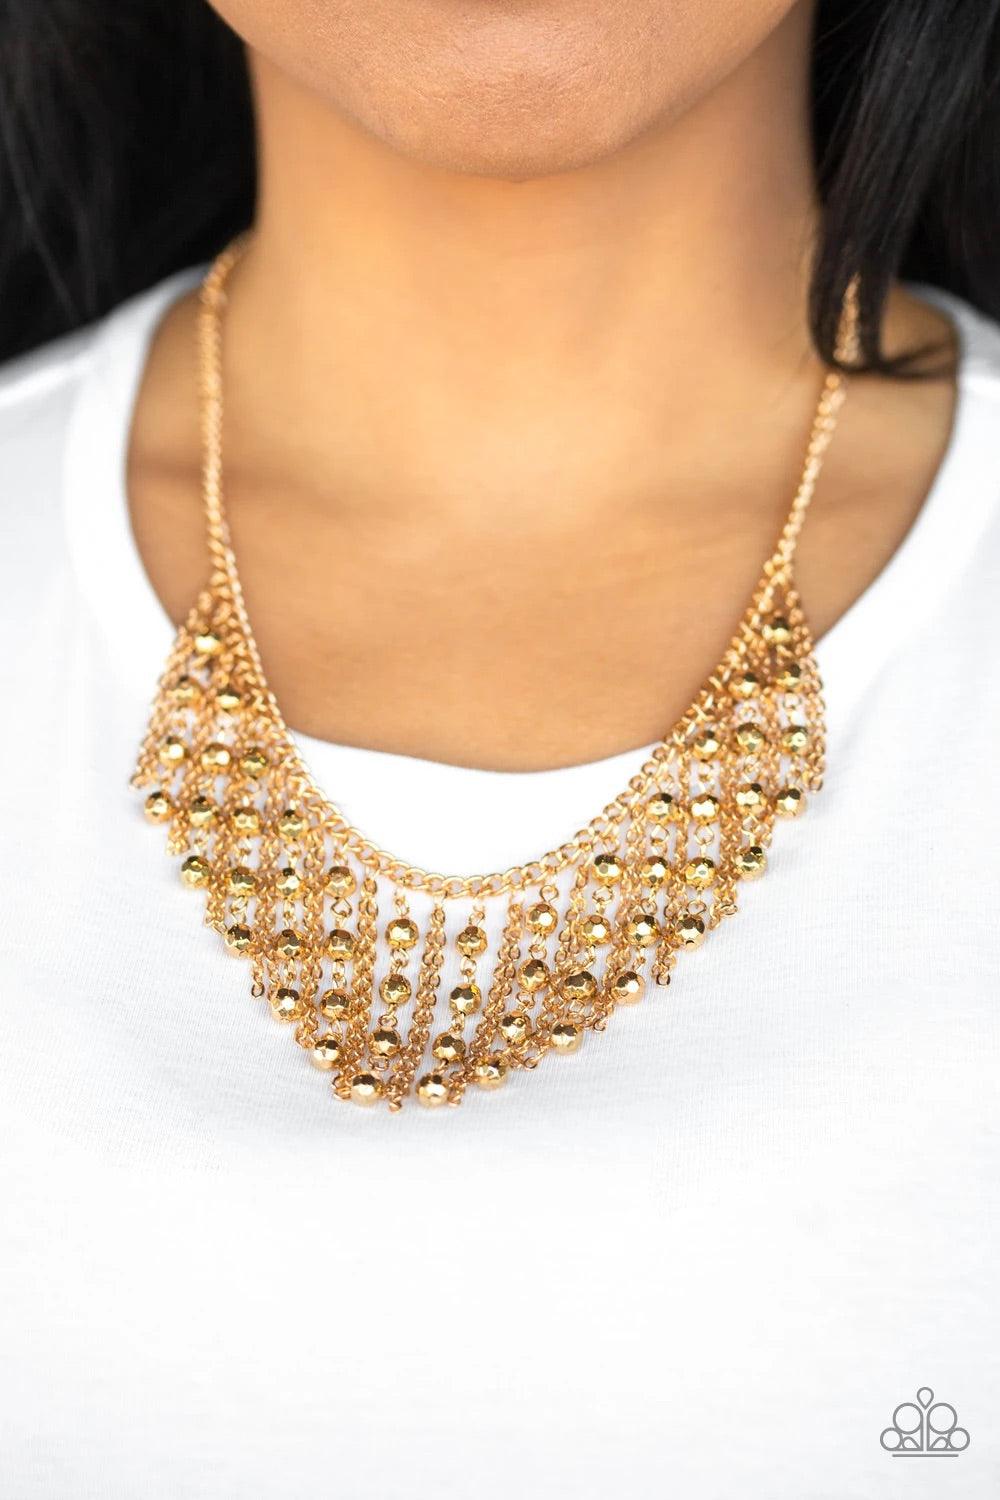 Paparazzi Accessories Rebel Remix - Gold Stands of faceted gold beads and glistening gold chains stream from a matching gold chain, creating an edgy fringe below the collar. Features an adjustable clasp closure. Sold as one individual necklace. Includes o